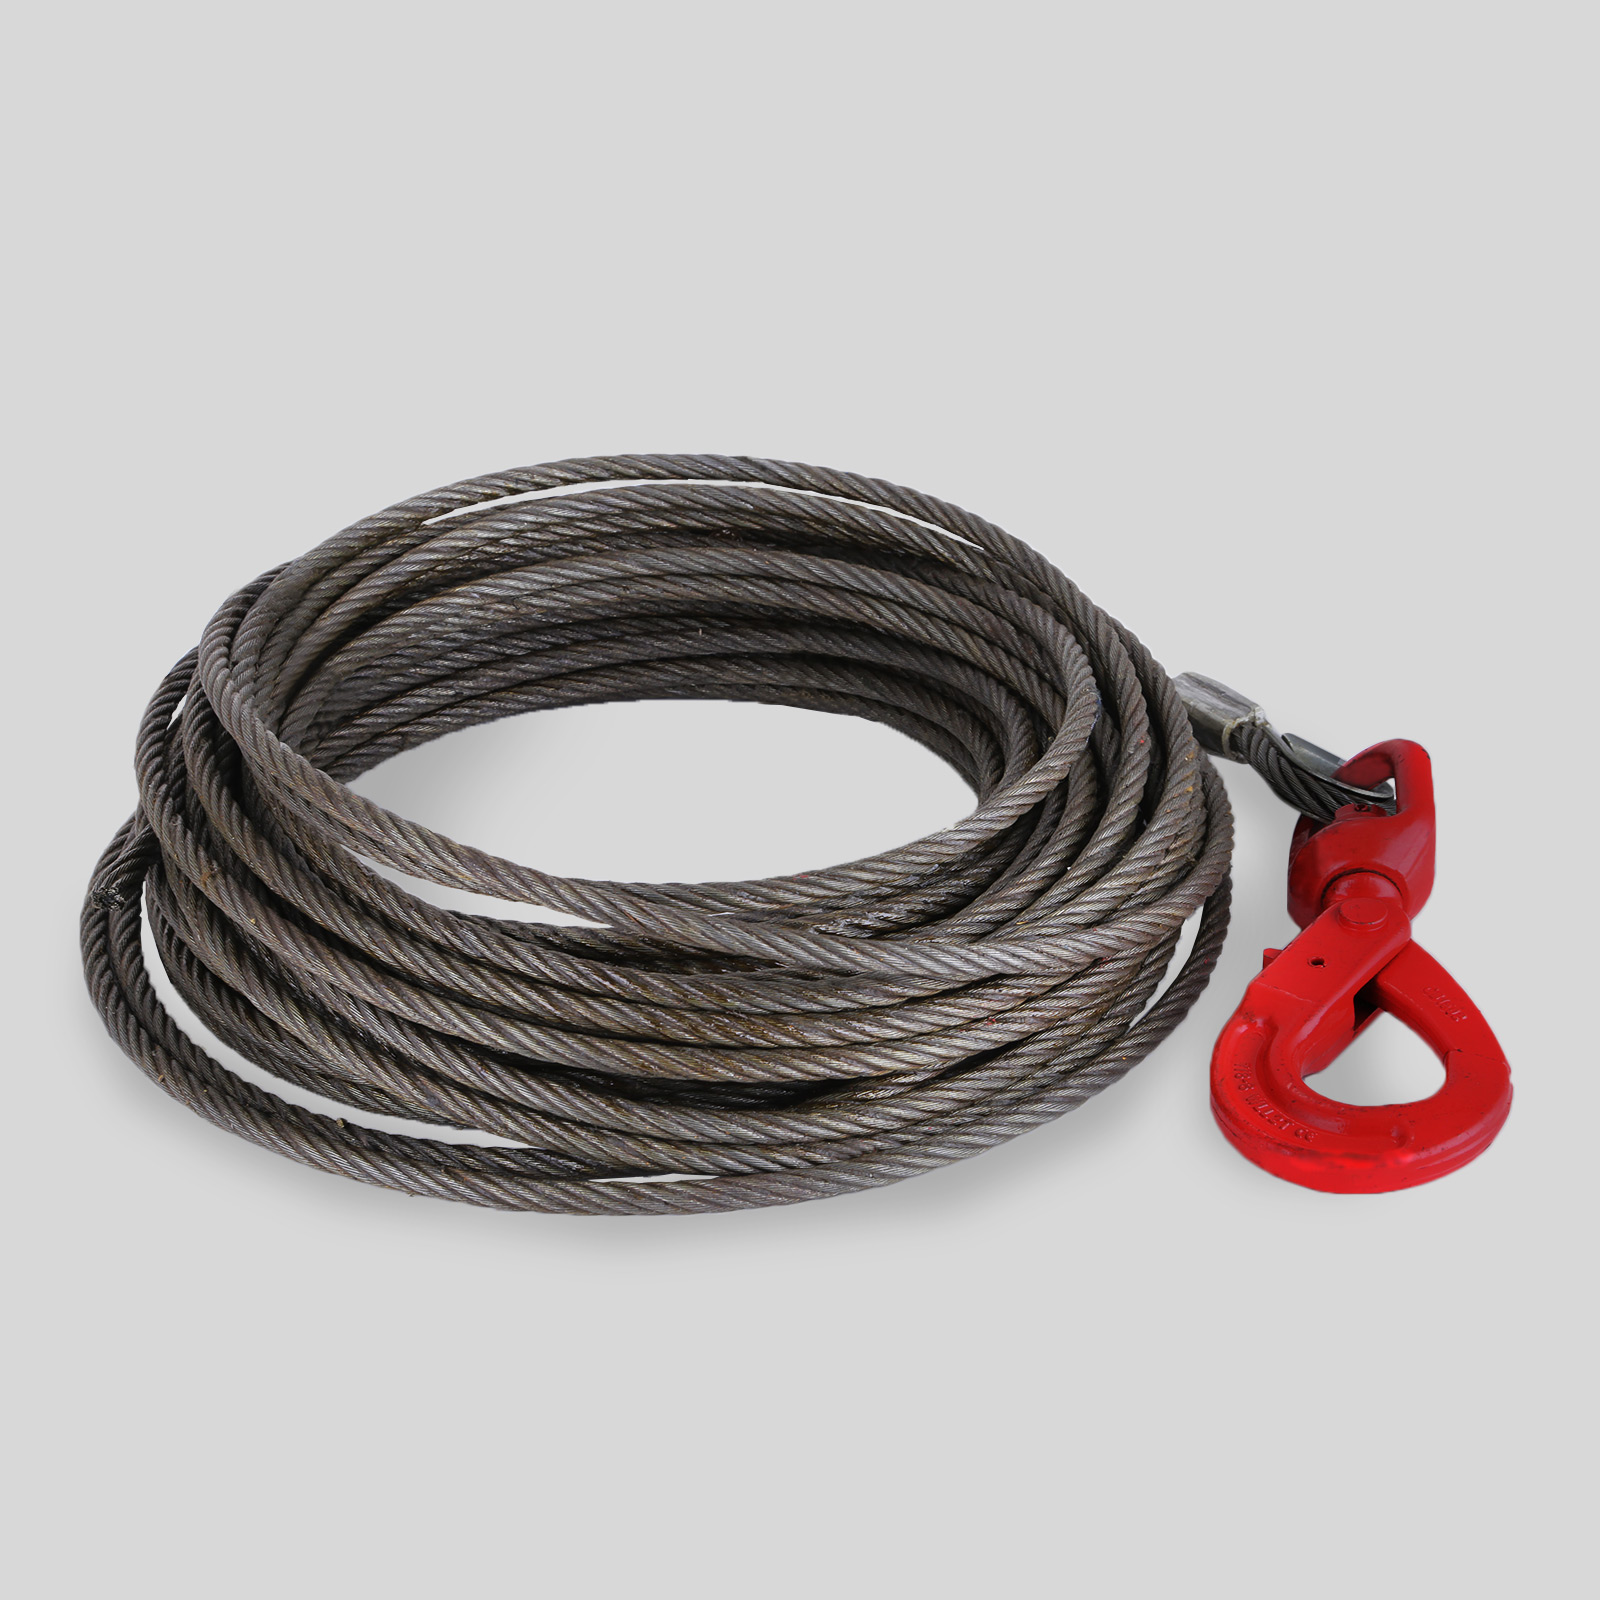 75ft VEVOR Winch Cable Replacement 3//8x 75 Wire Rope 4400lbs for Tow Trucks Roll Backs and Wreckers 75ft